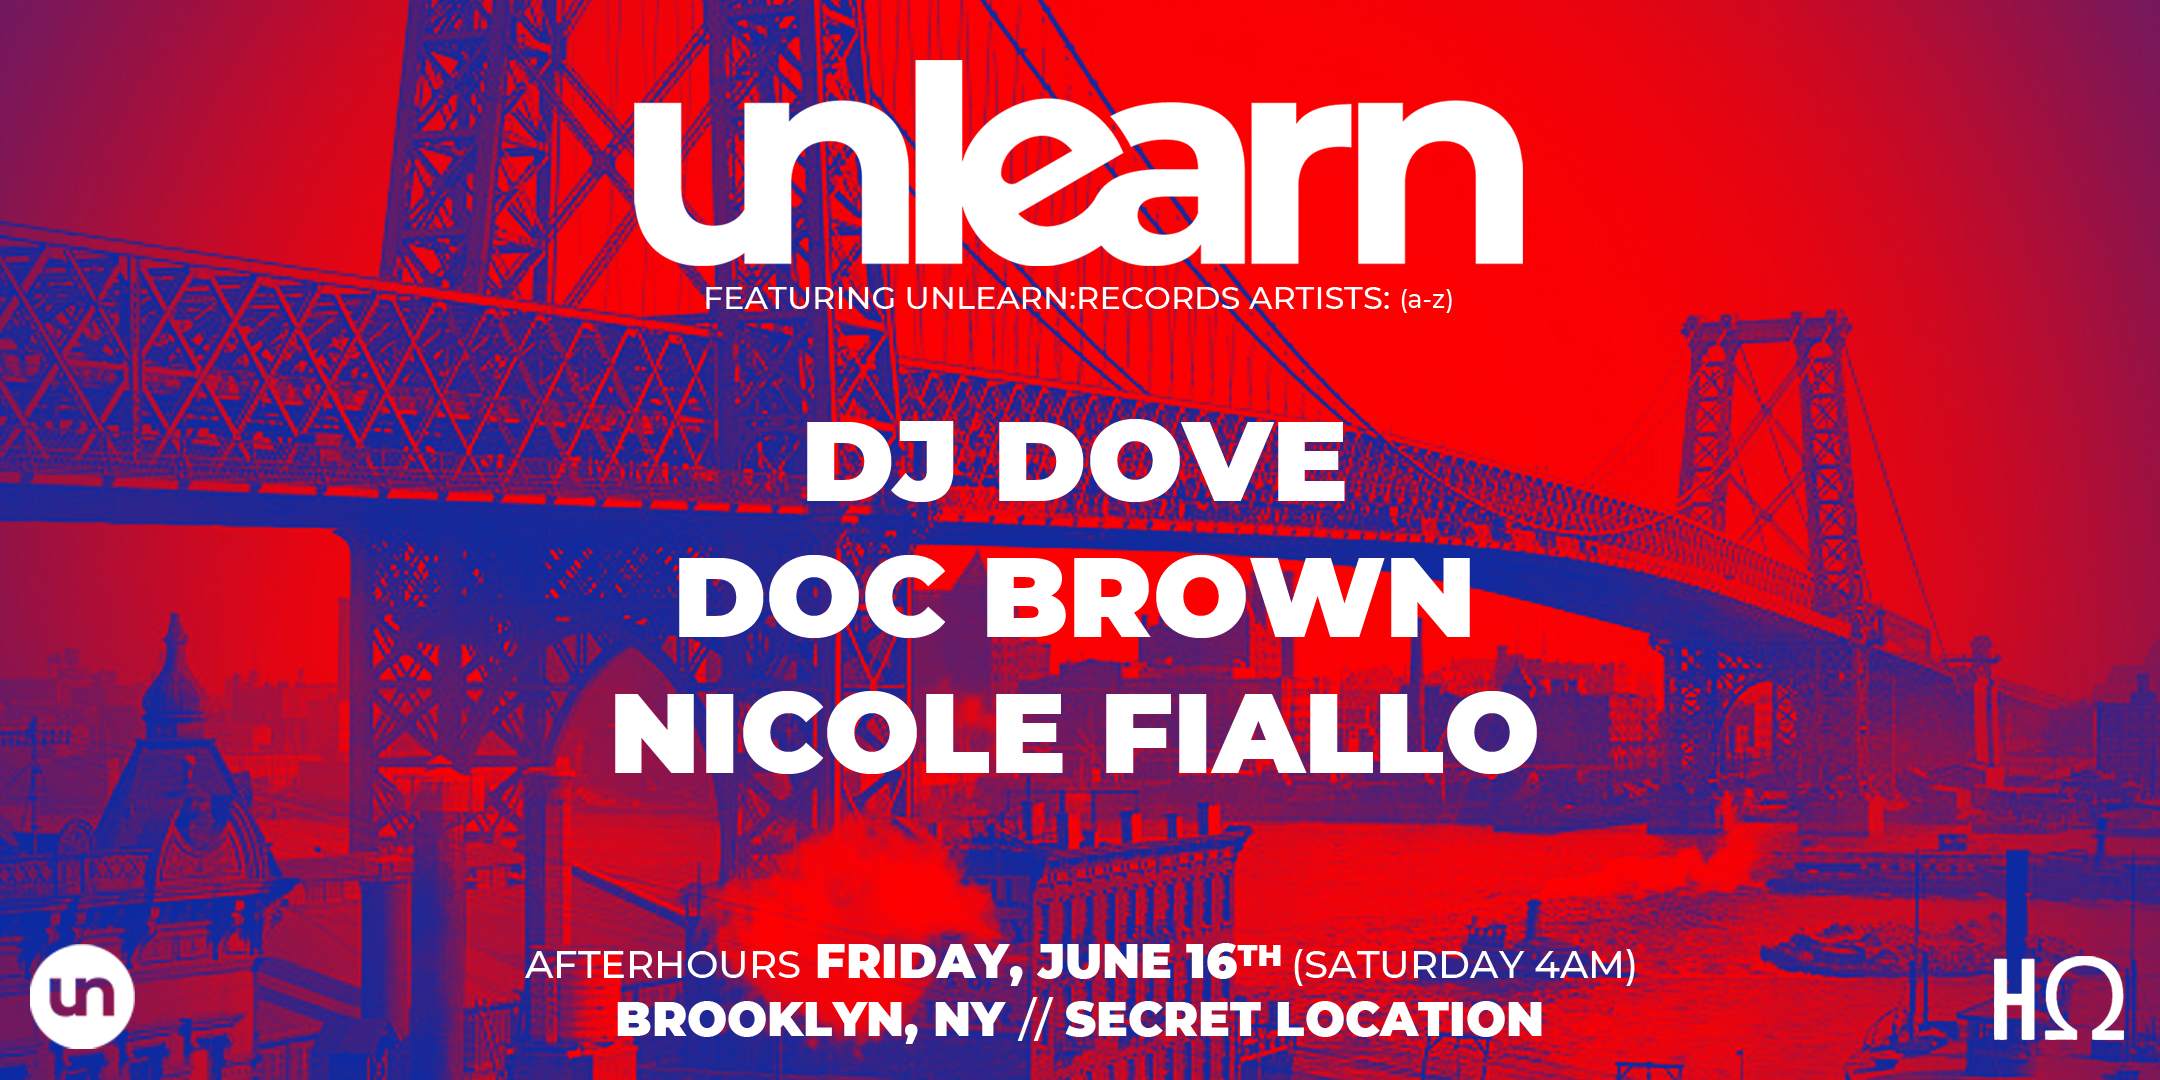 Doc Brown presents Unlearn:Records Afterhours Showcase NYC - Página frontal